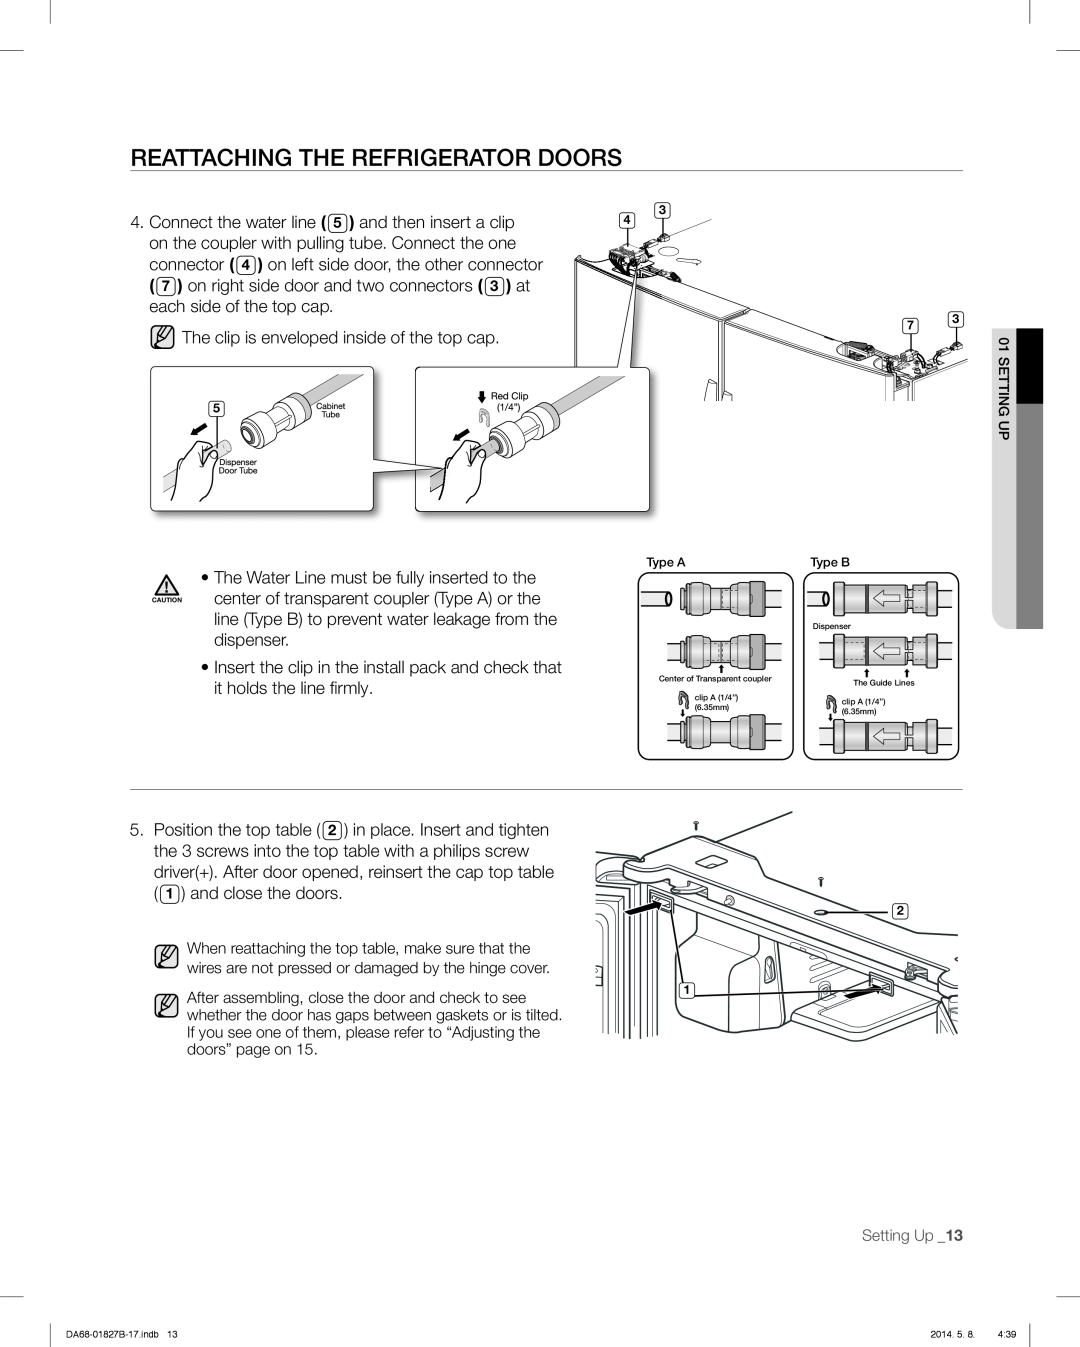 Samsung RFG237AAWP, RFG237AARS Reattaching The Refrigerator Doors, Connect the water line 5 and then insert a clip 